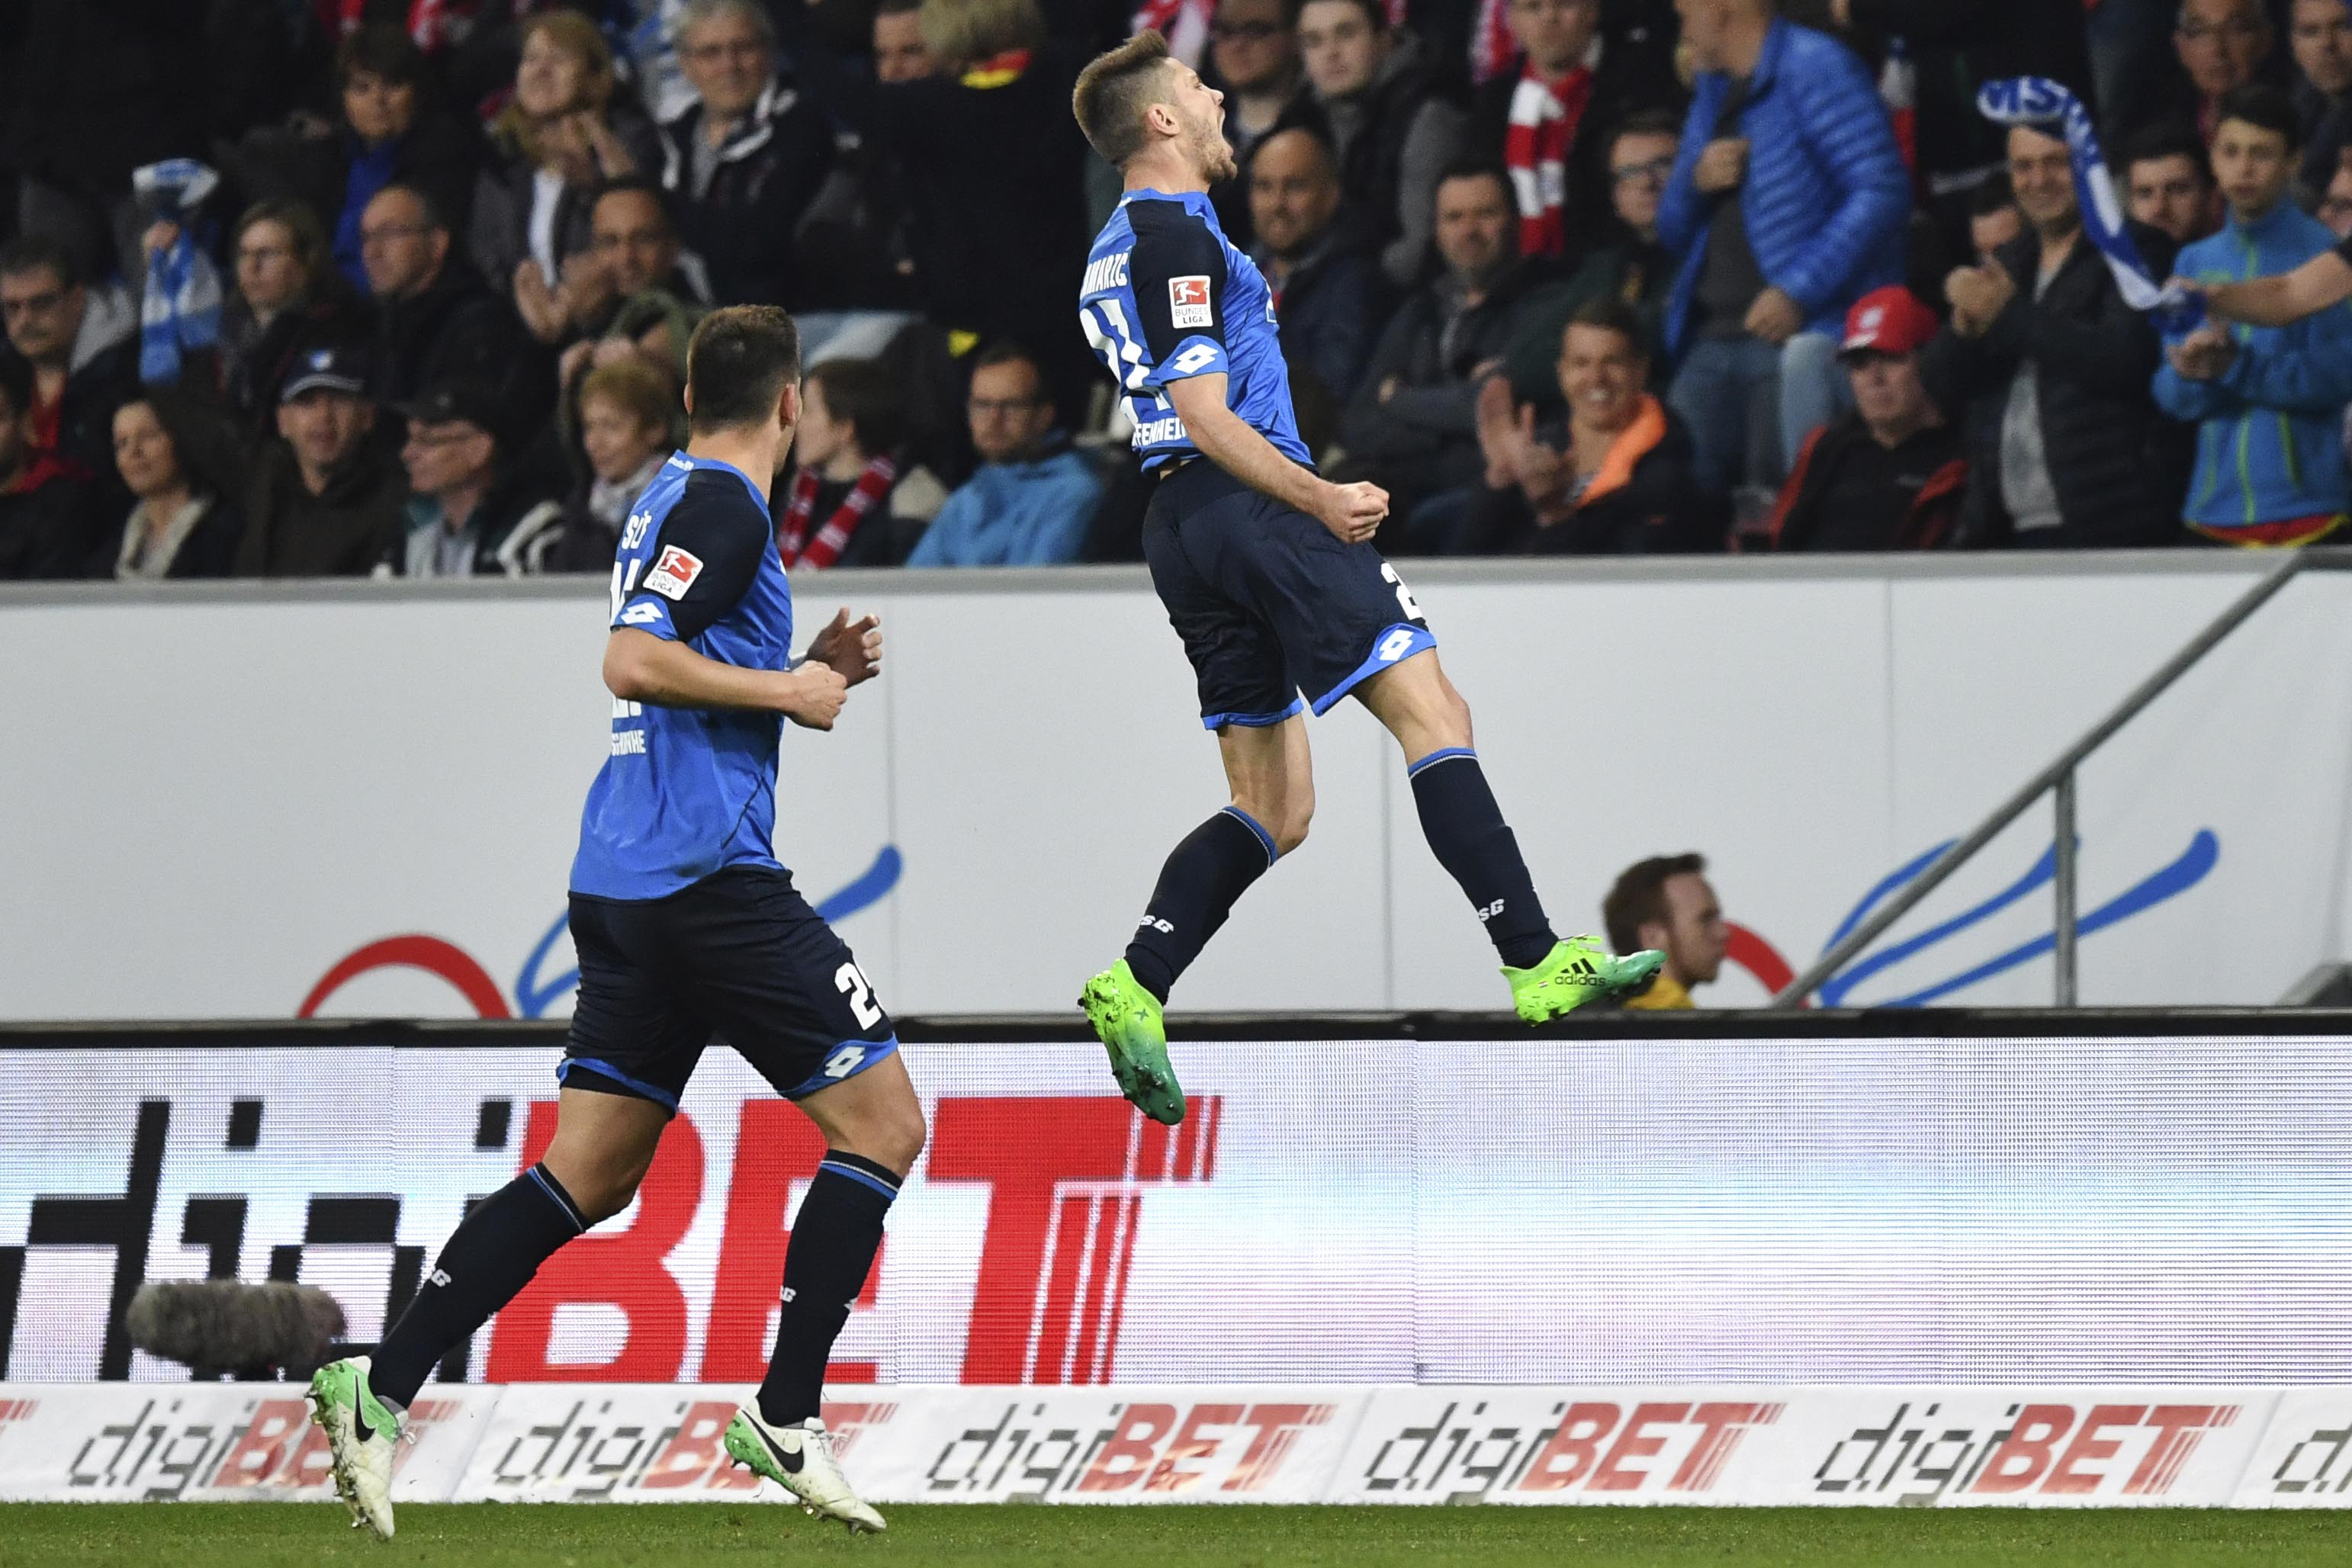 Hoffenheim's Andrej Kramaric (right), celebrates scoring the opening goal of the game against Nayern Munich during the German Bundesliga soccer match between 1899 Hoffenheim and Bayern Munich in the Rhein-Neckar-Arena in Sinsheim, Germany, on Tuesday April 4, 2017. Photo: AP